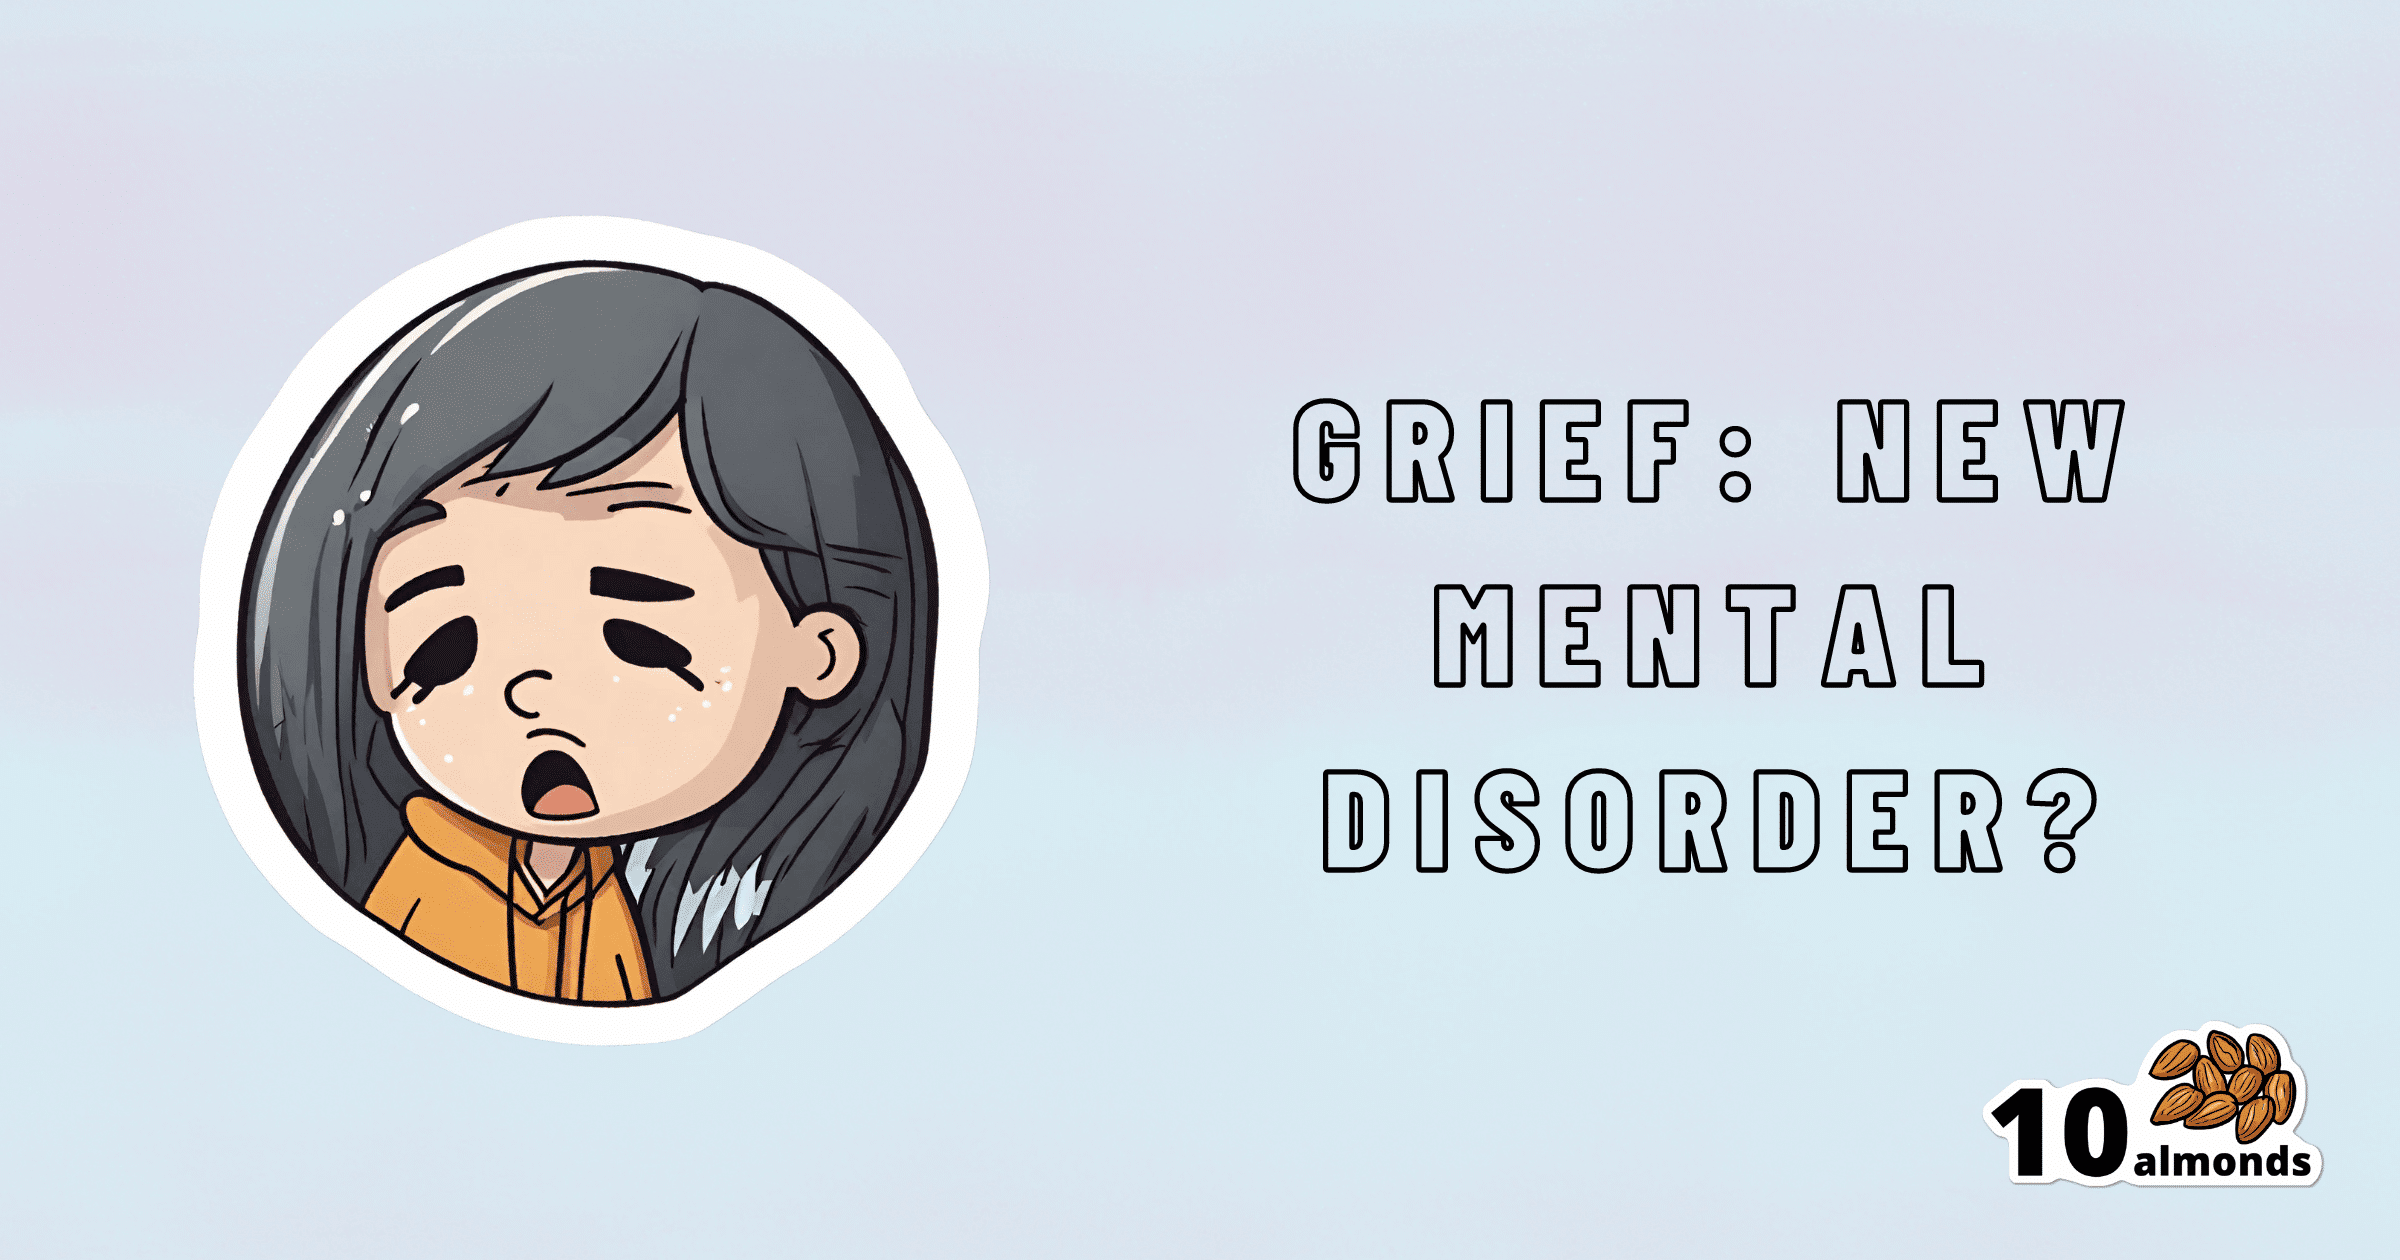 A cartoon girl experiencing prolonged grief, a potential new mental disorder.